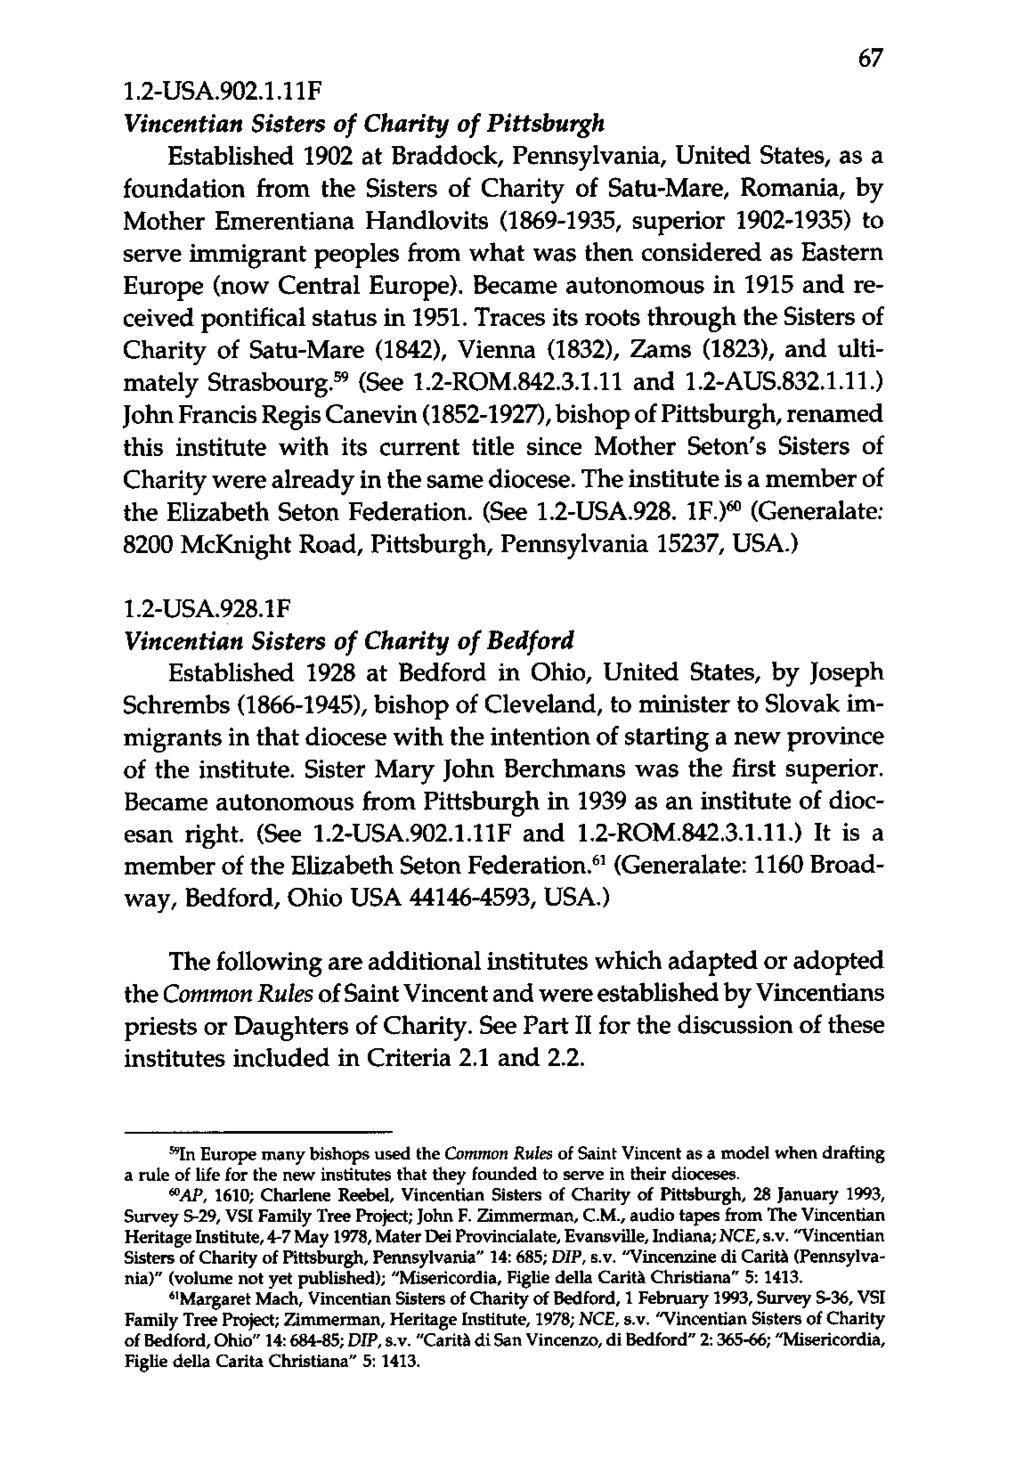 67 1.2-USA902.1.llF Vincentian Sisters of Charity of Pittsburgh Established 1902 at Braddock, Pennsylvania, United States, as a foundation from the Sisters of Charity of Satu-Mare, Romania, by Mother